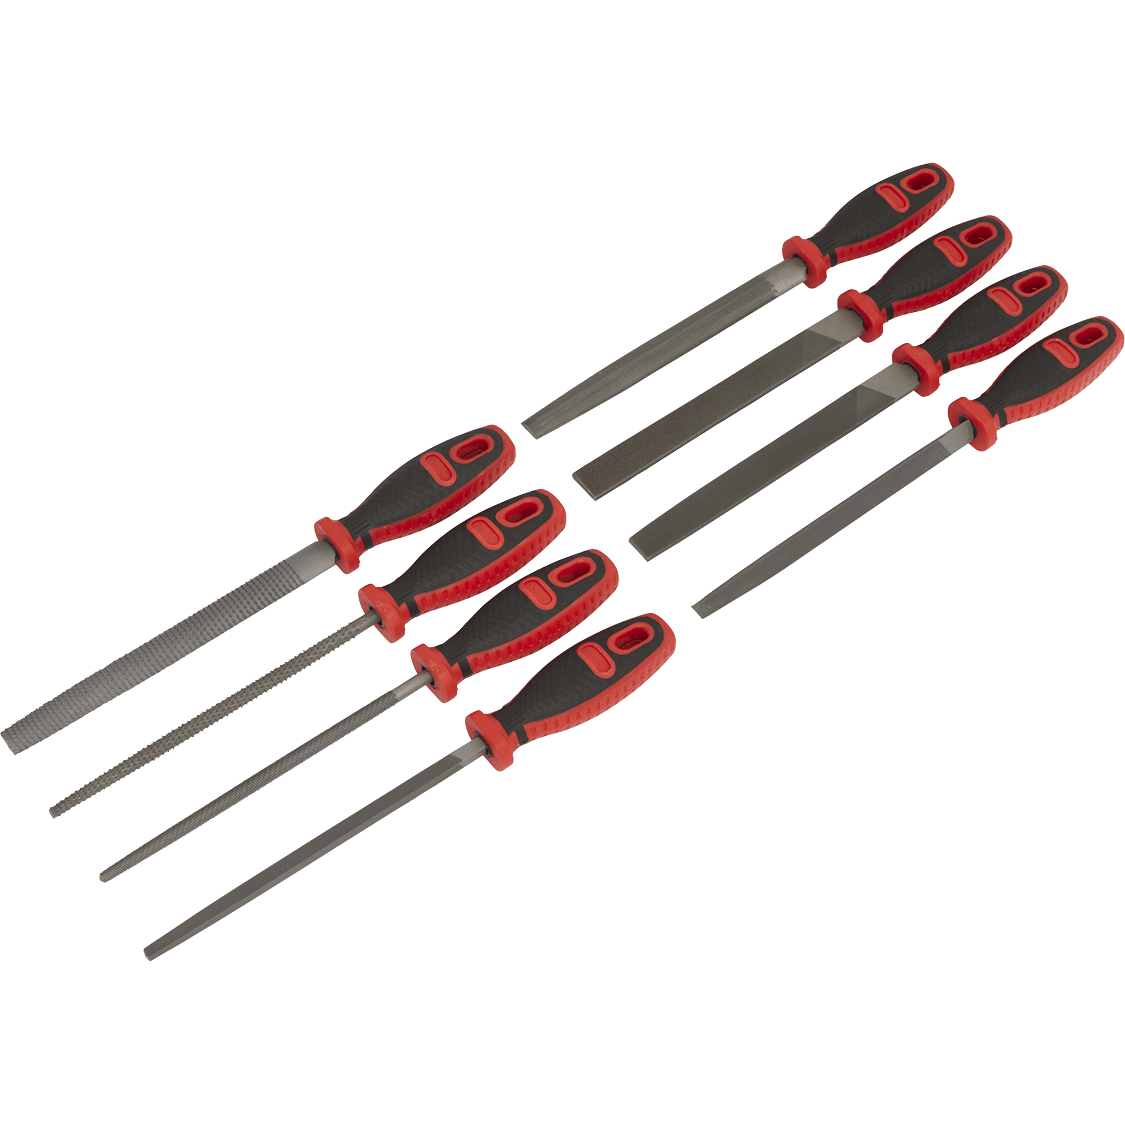 Sealey 8 Piece File and Rasp Set